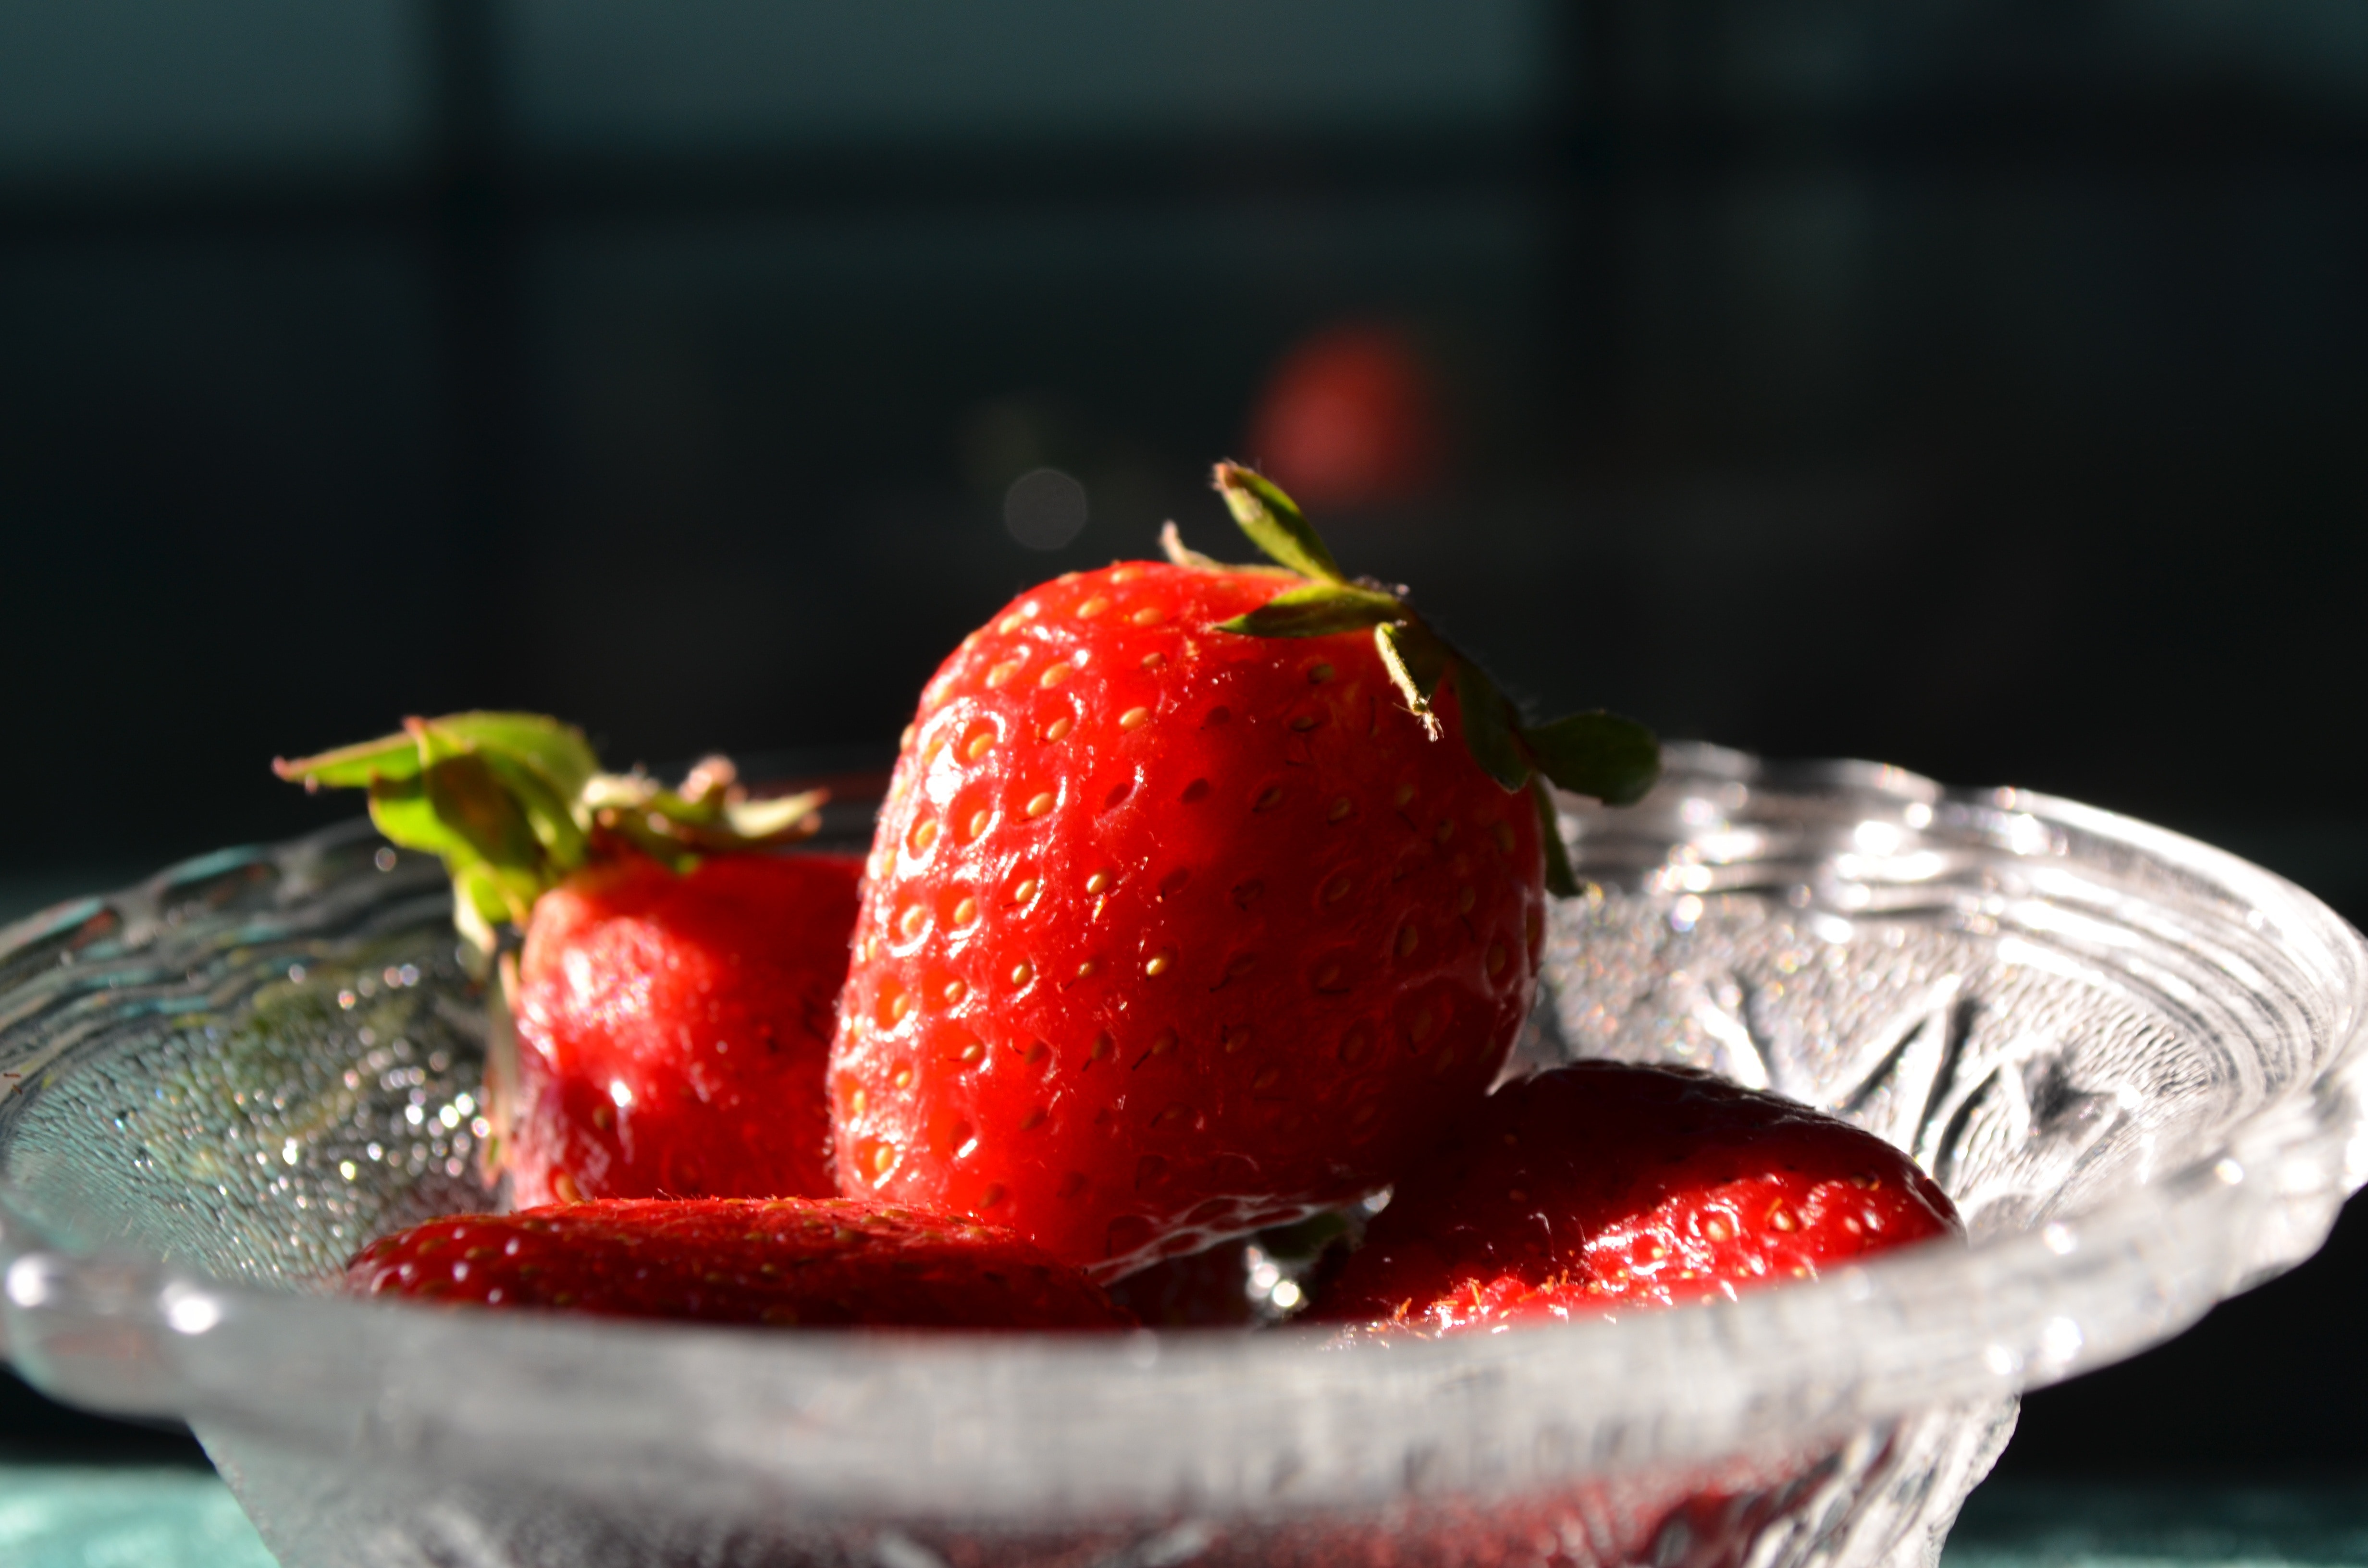 strawberries in clear glass bowl